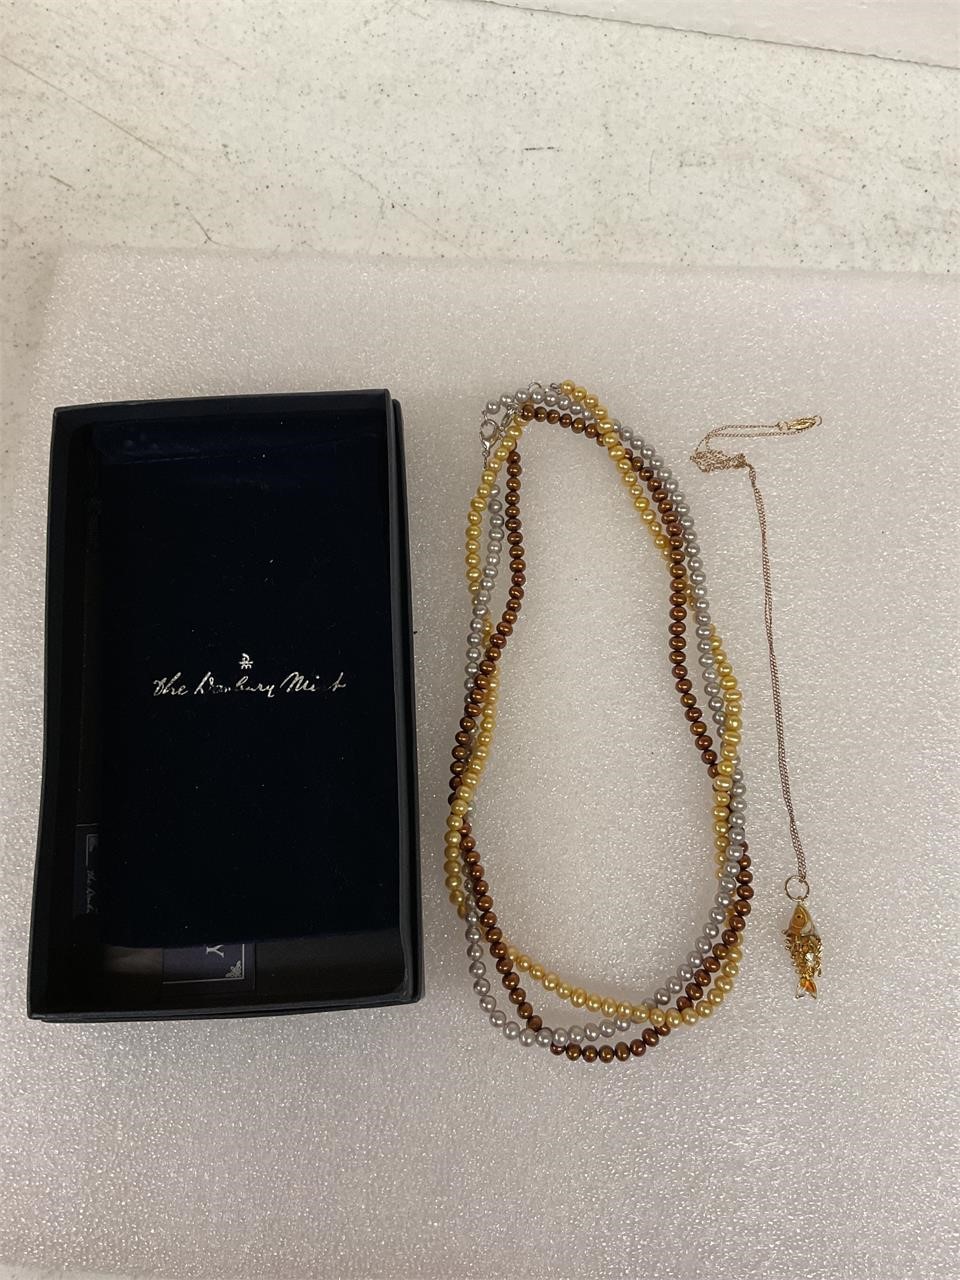 Danbury mint necklace and fish necklace